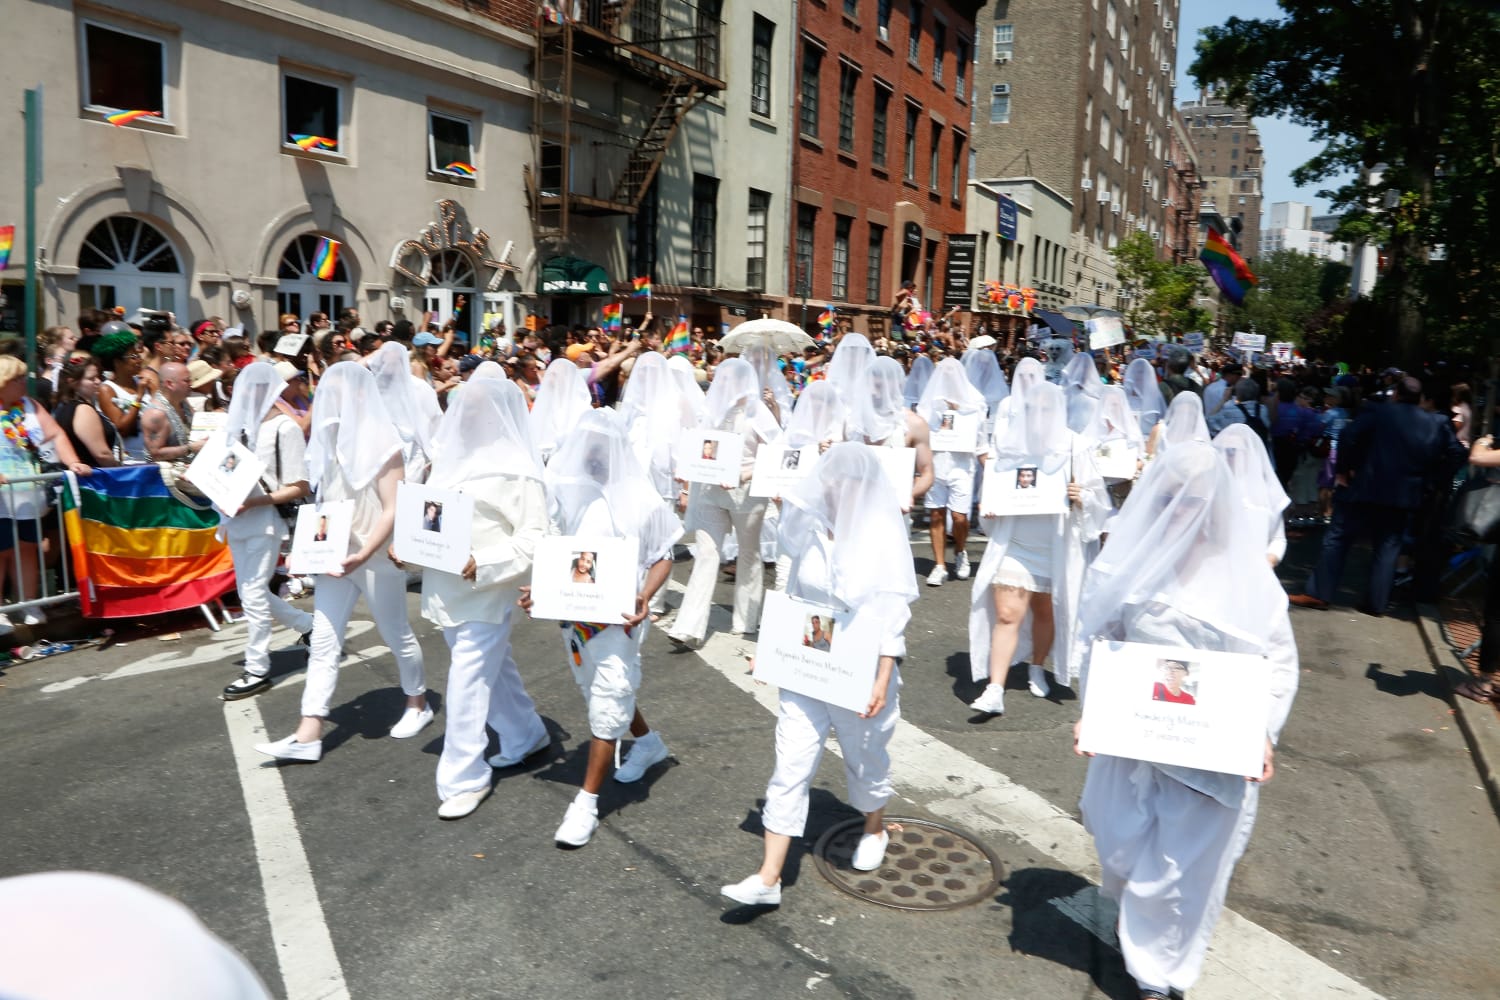 when is the gay pride parade in nyc 2016